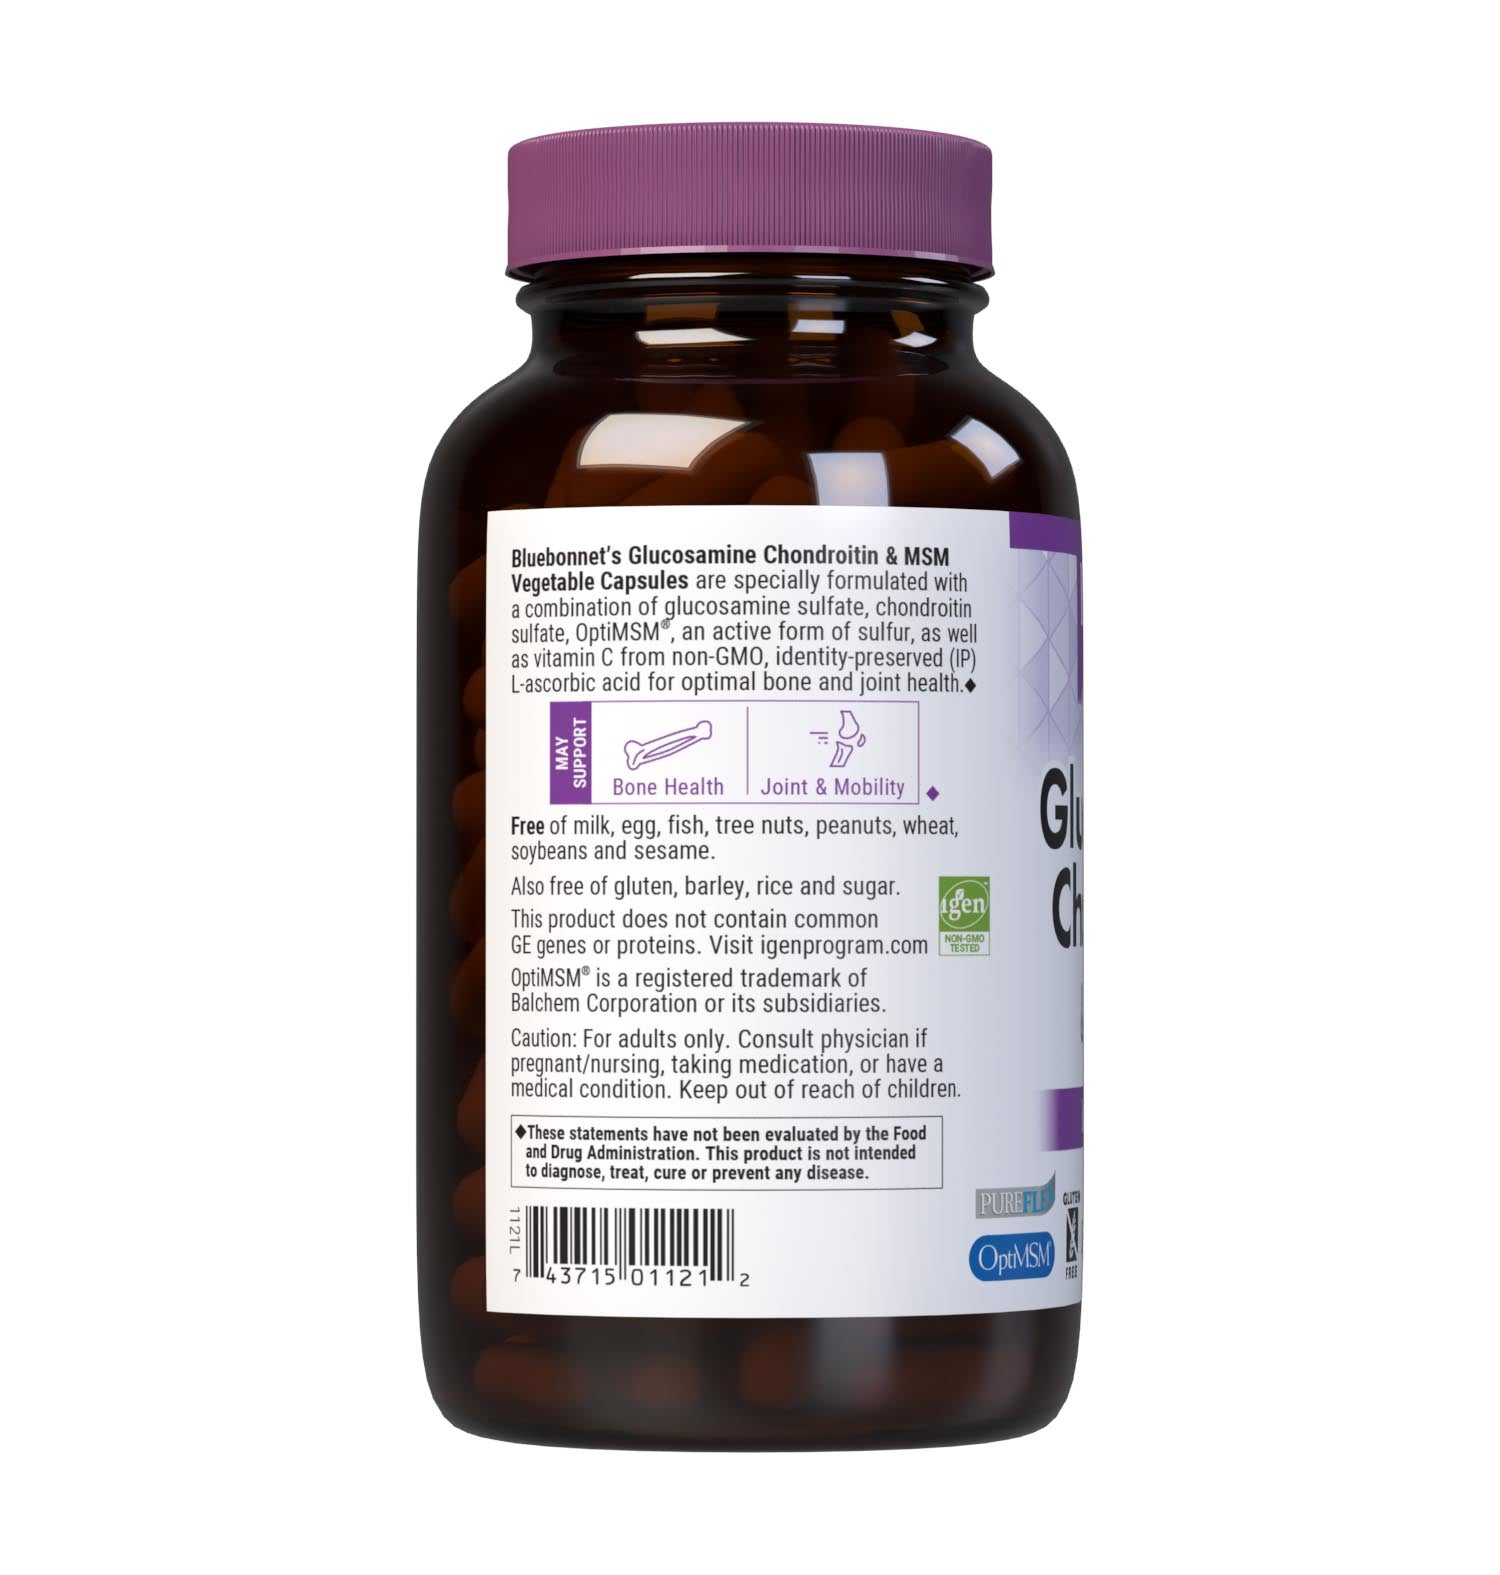 Bluebonnet’s Glucosamine Chondroitin Sulfate & MSM 180 Vegetable Capsules are specially formulated with a combination of glucosamine sulfate, chondroitin sulfate, OptiMSM an active form of sulfur, as well as vitamin C from Identity-Preserved (IP) L-ascorbic acid for optimal joint health. Description panel. #size_180 count